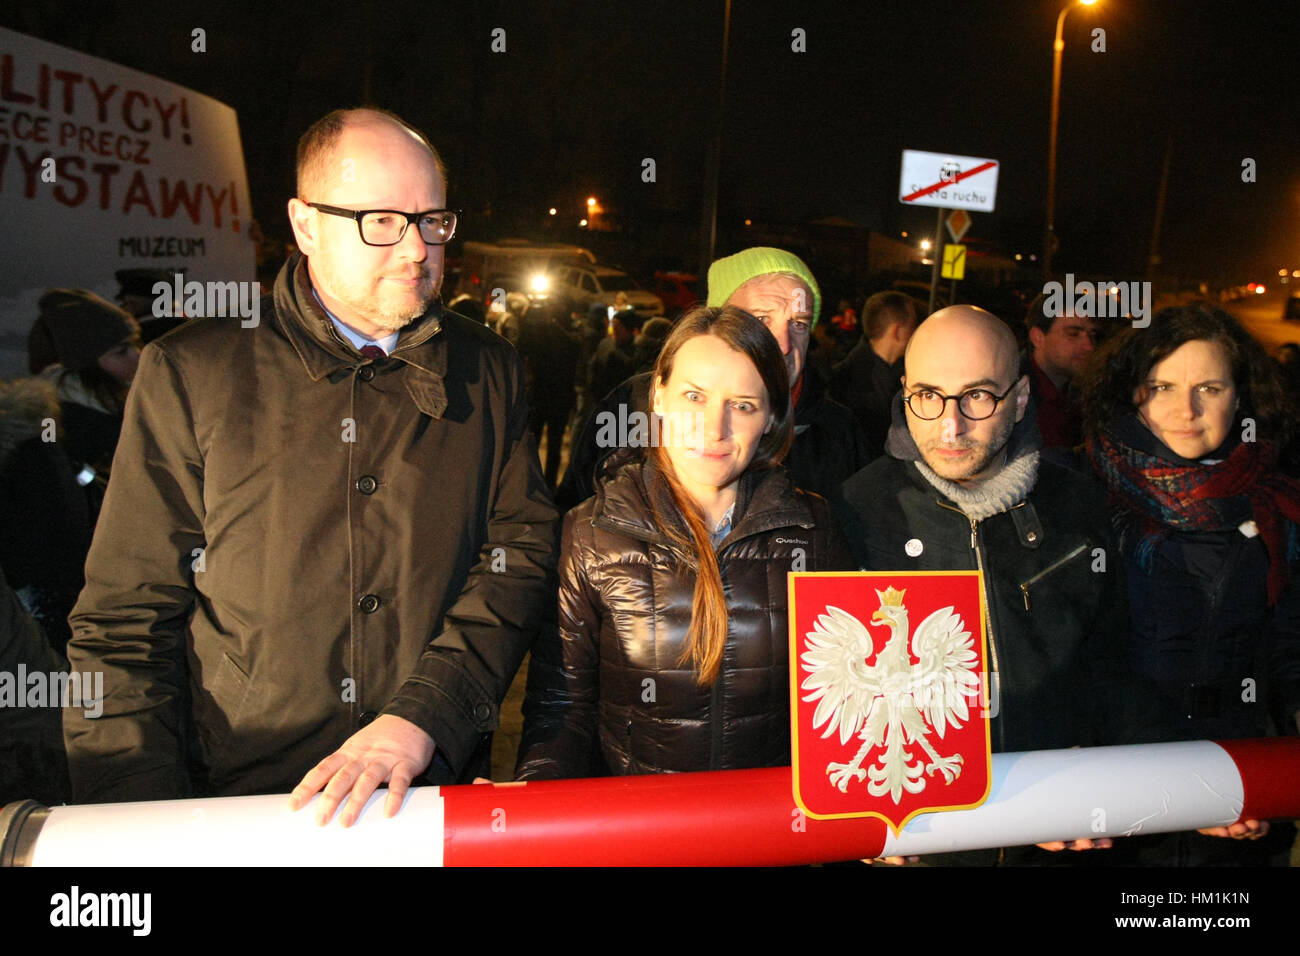 Gdansk, Poland. 31st Jan, 2017. pawel Adamowicz (L) Agnieszka Pomaska (C) Polish parliament member and Radomir Szumelda (R) holding symbolic border barrier are seen outside the Second World War Museum on 31 January 2017 in Gdansk, Poland. Protest was organized by KOD movement against Poland's nationalist government plans to reshape the Museum's permanent exhibition into a display more focused on Poland's experience of the conflict. Museum is expected to open to the public on February 2017, is to place the war in broader international context. Credit: Michal Fludra/Alamy Live News Stock Photo